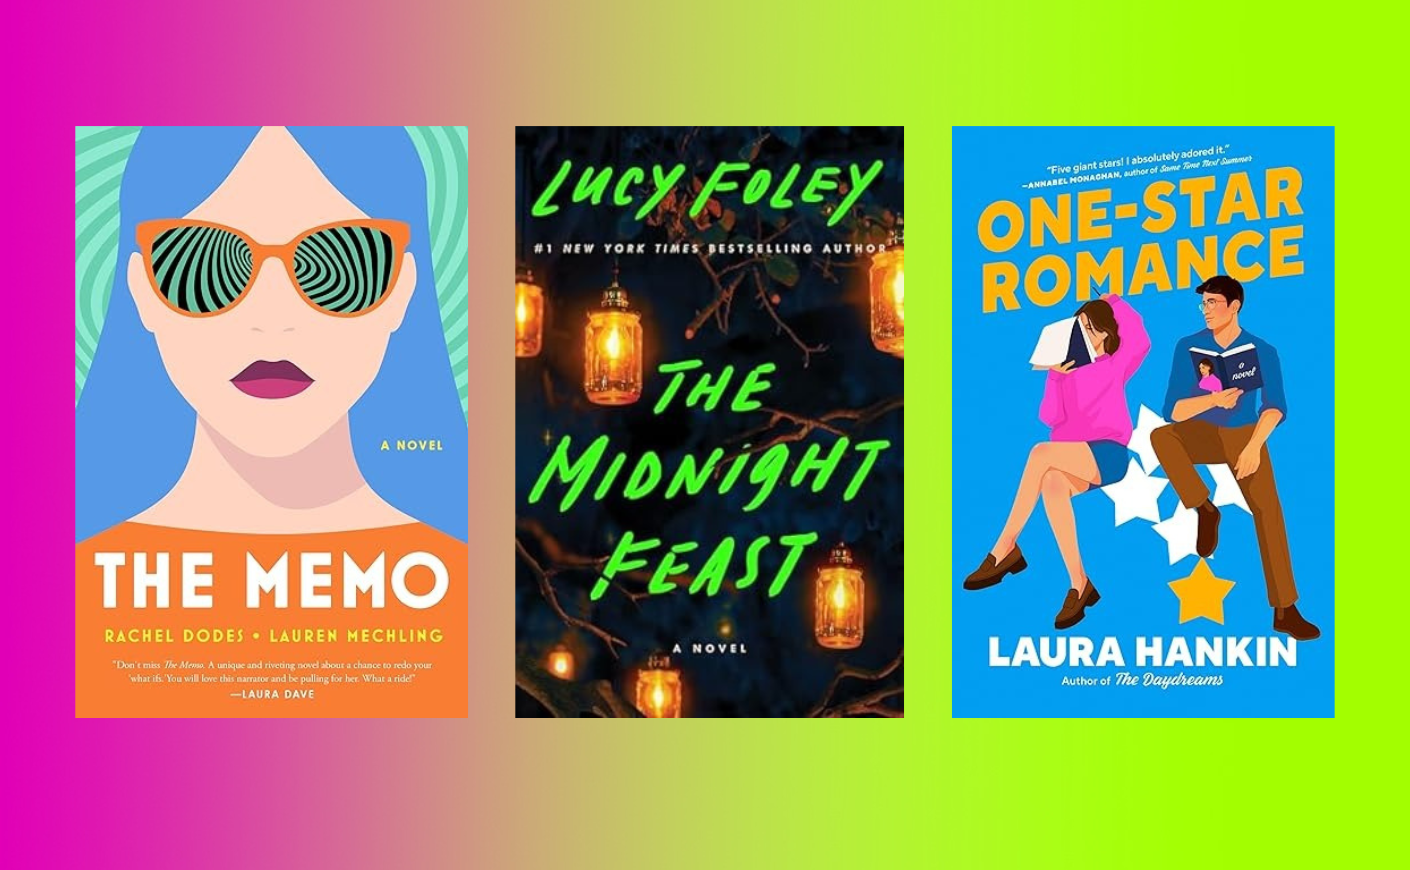 Book covers: the Memo, the Midnight Feast, One-Star Romance